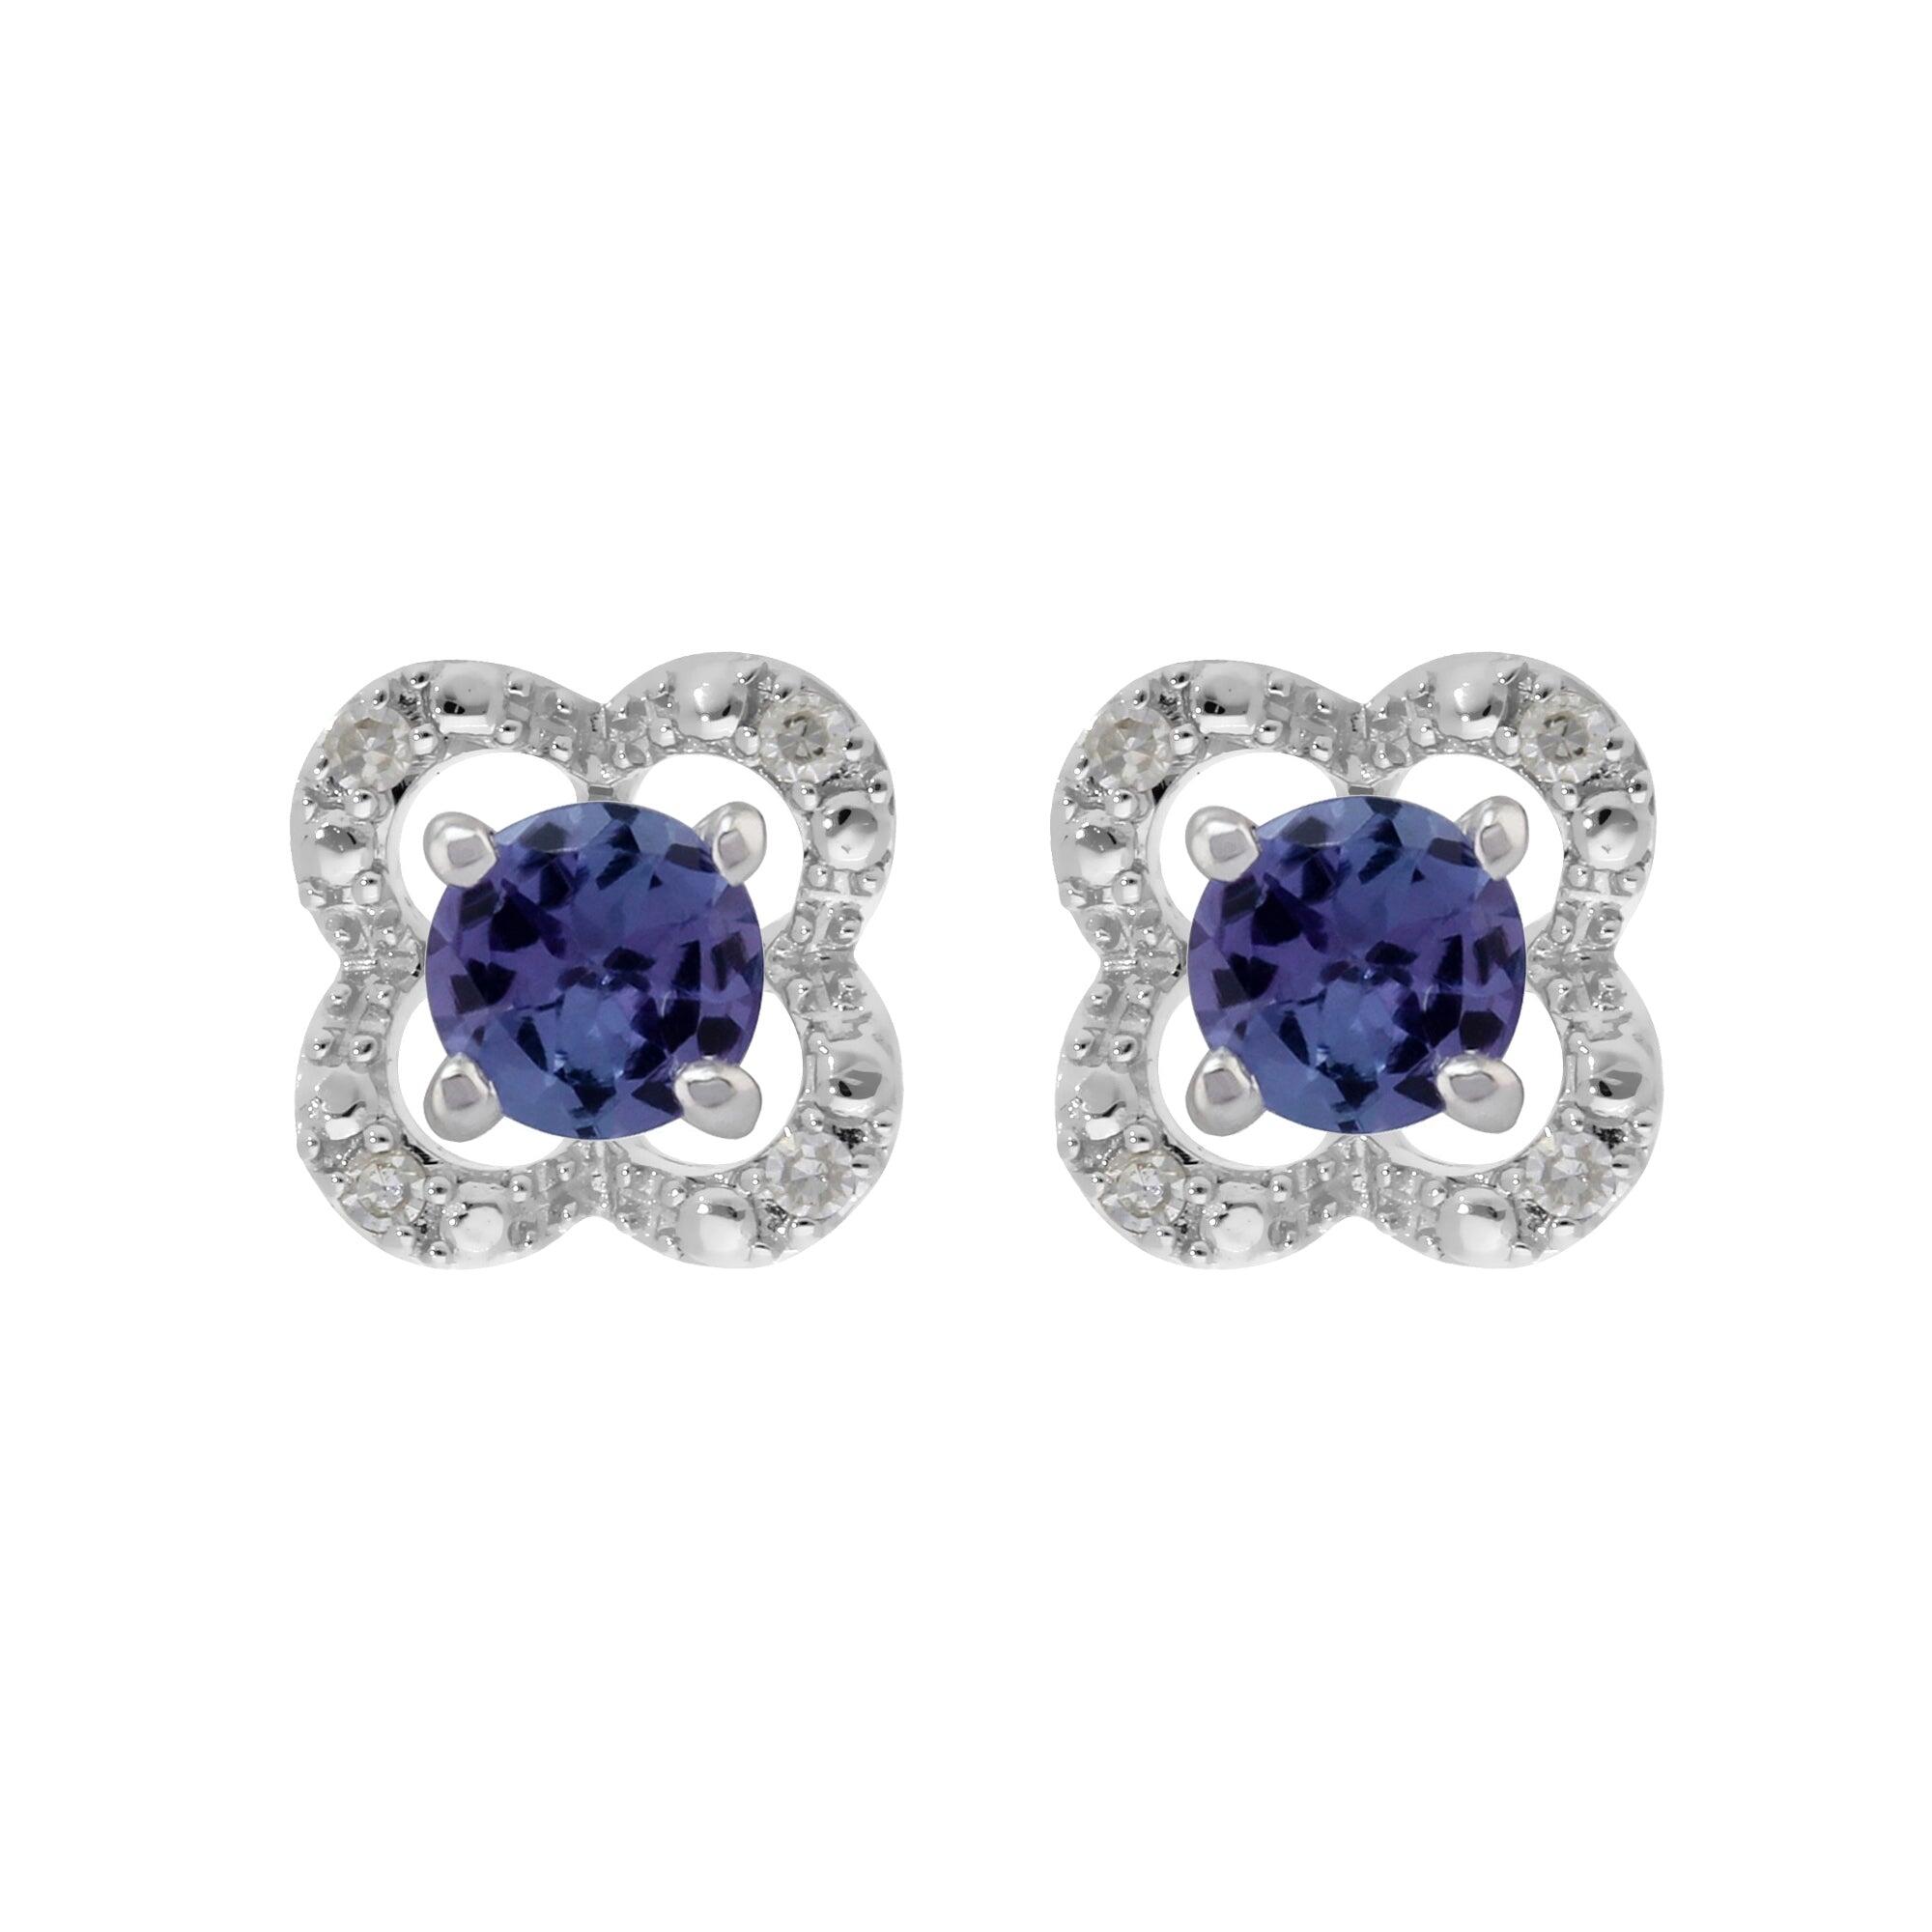 Classic Round Tanzanite Stud Earrings with Detachable Diamond Flower Ear Jacket in 9ct White Gold